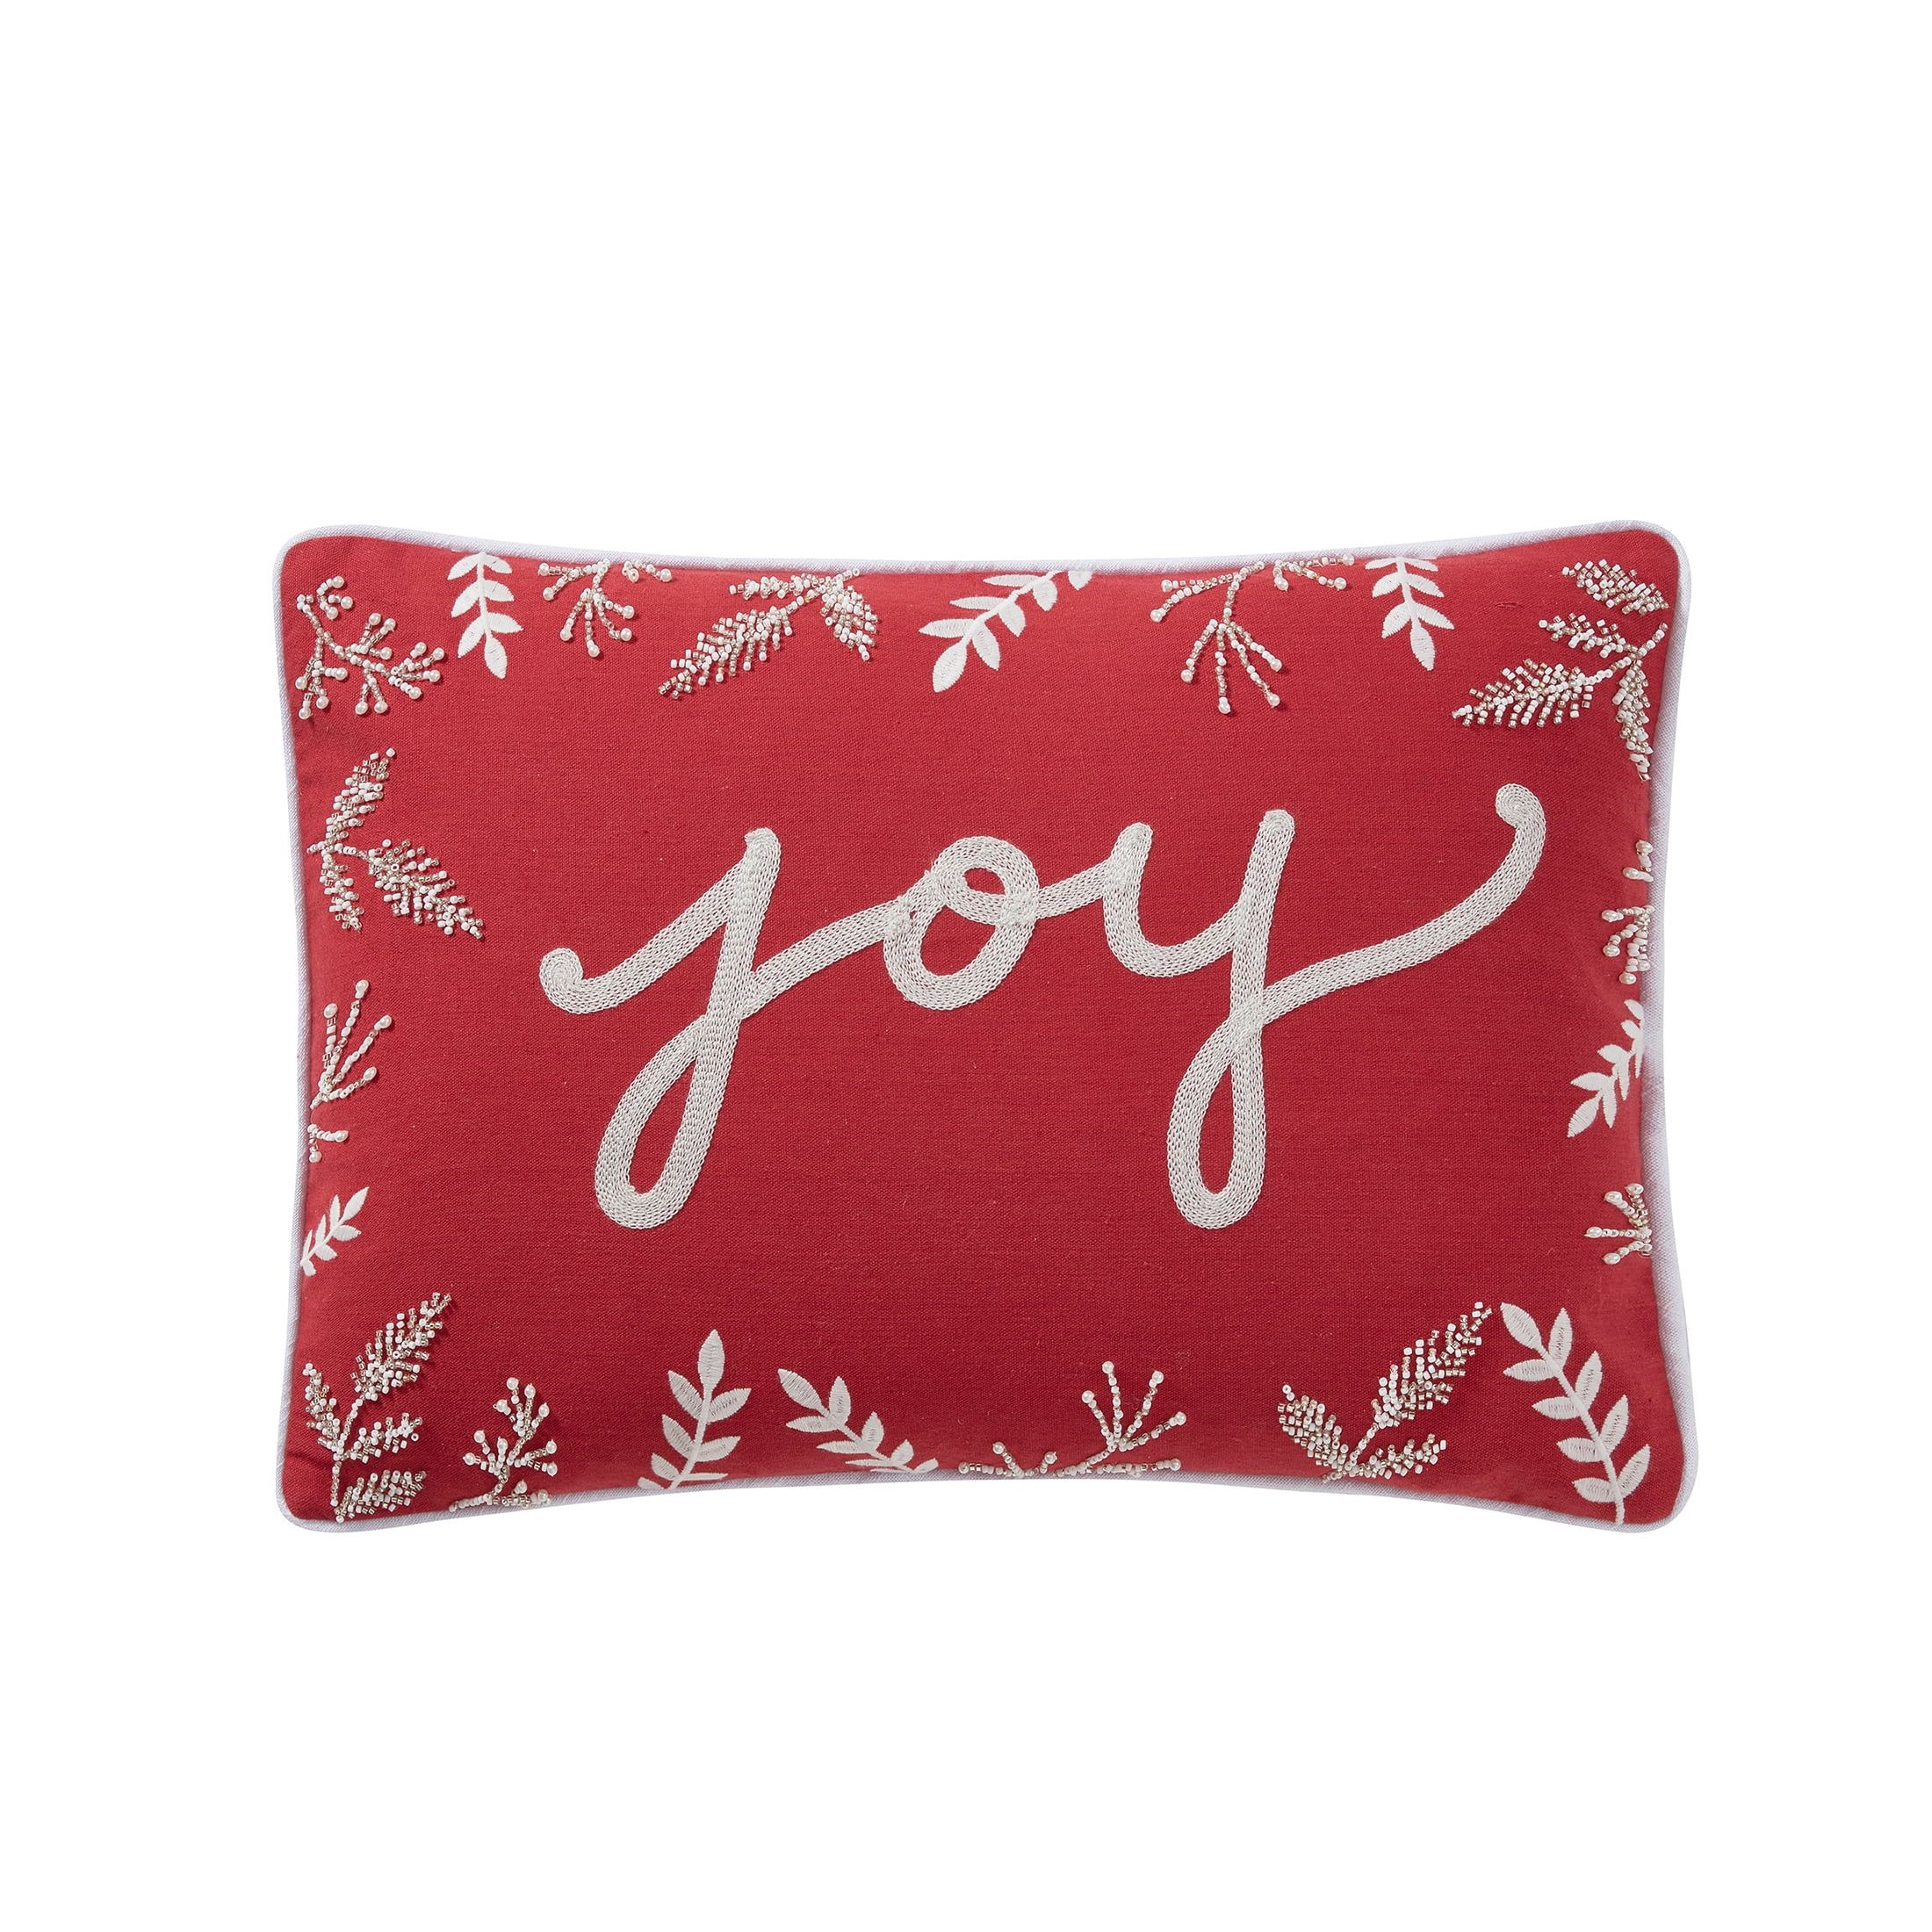 My Texas House Joy 14" x 20" Red Embroidered Cotton Decorative Pillow Cover | Walmart (US)